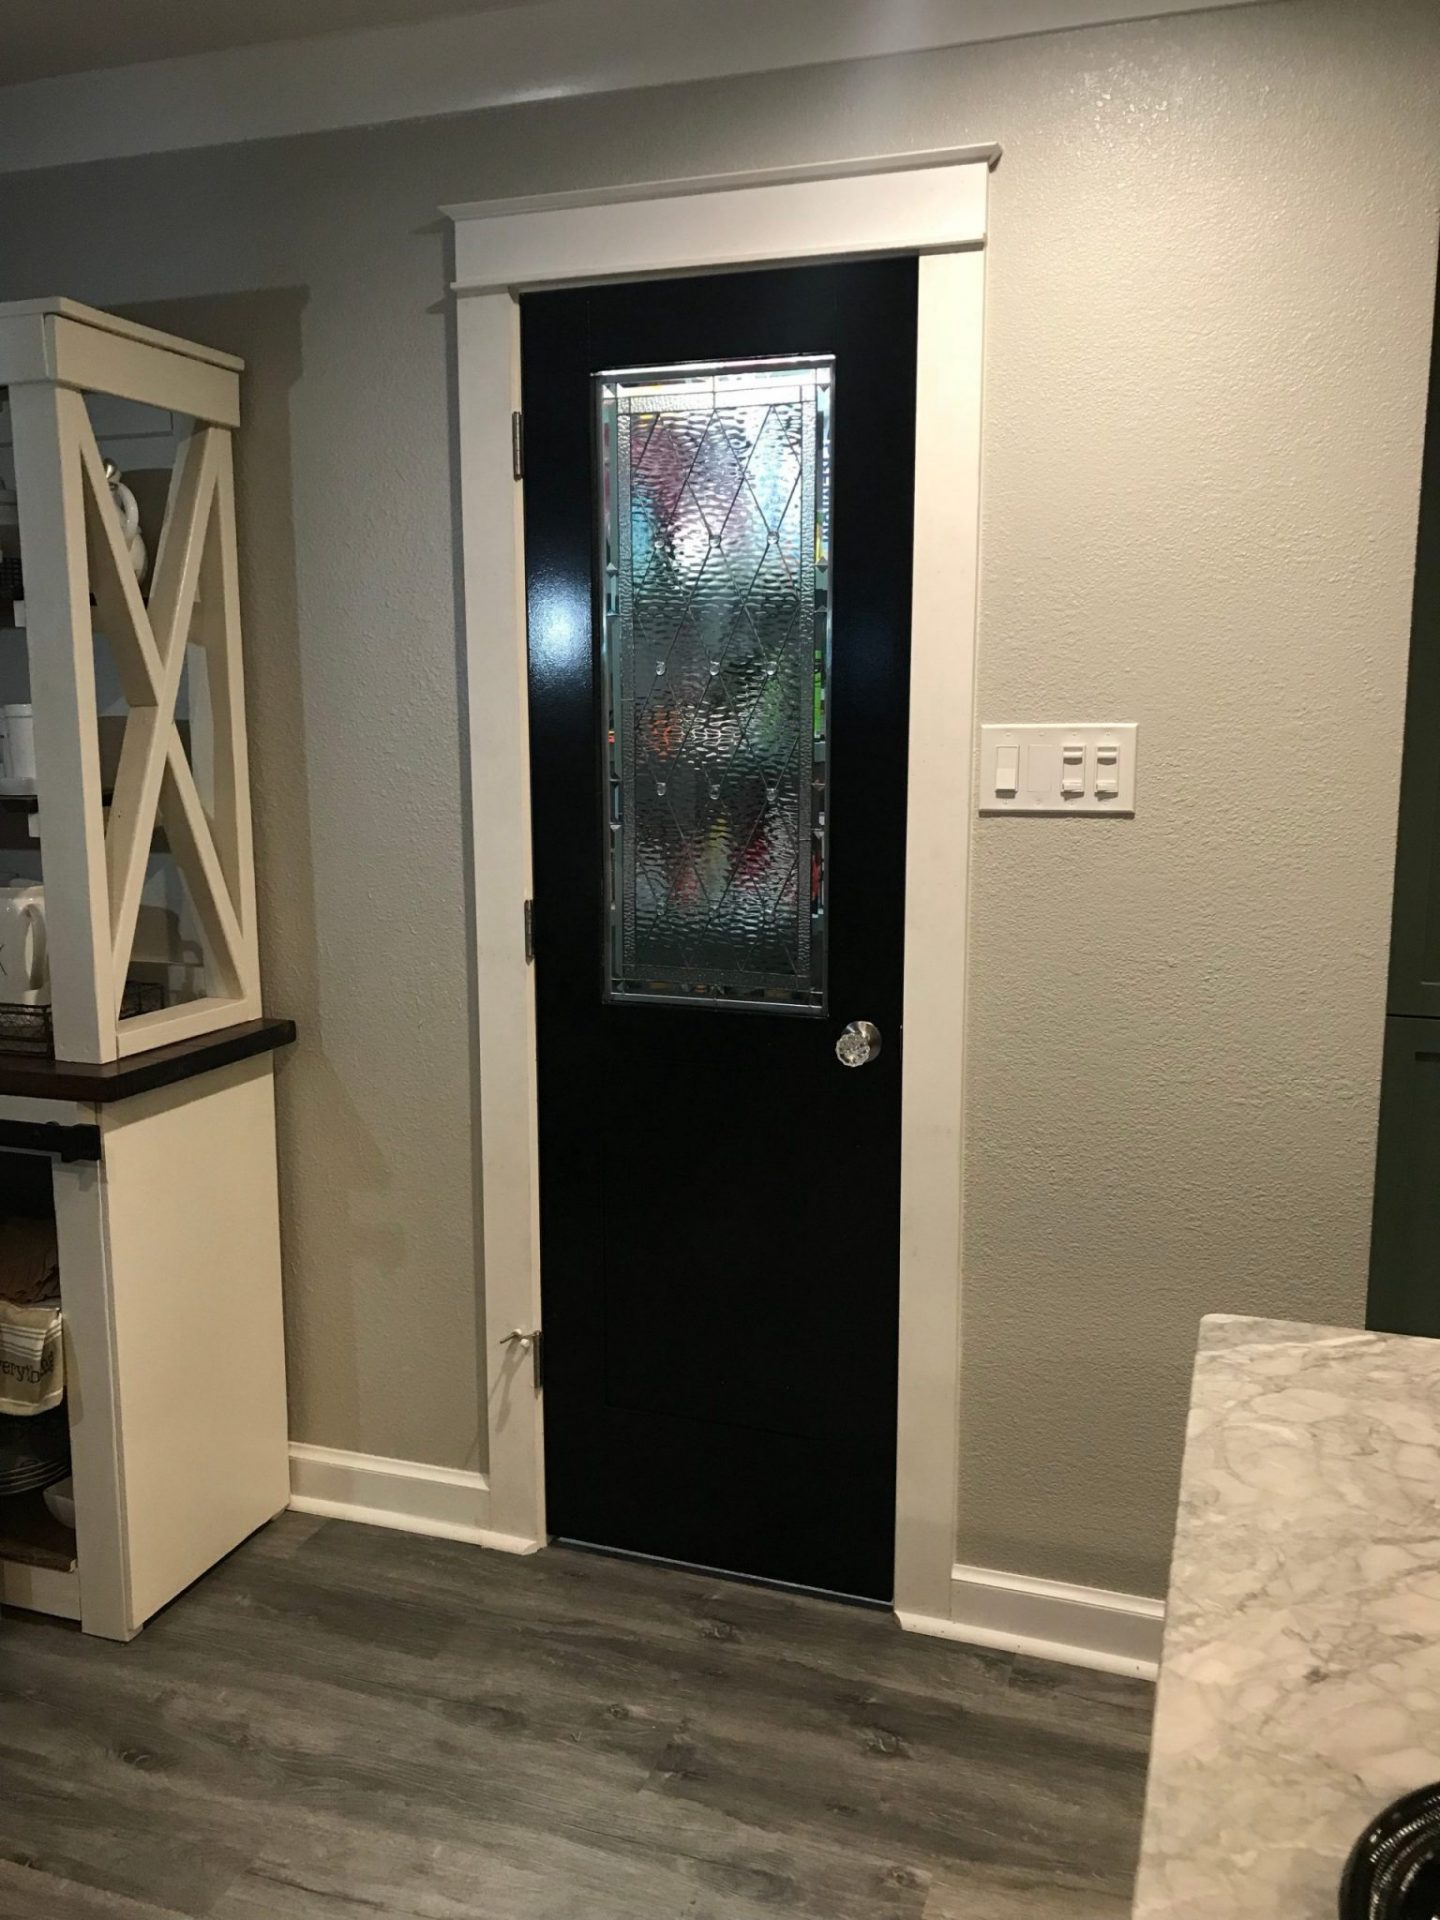 Diamonds and jewels insert installed into a pantry door